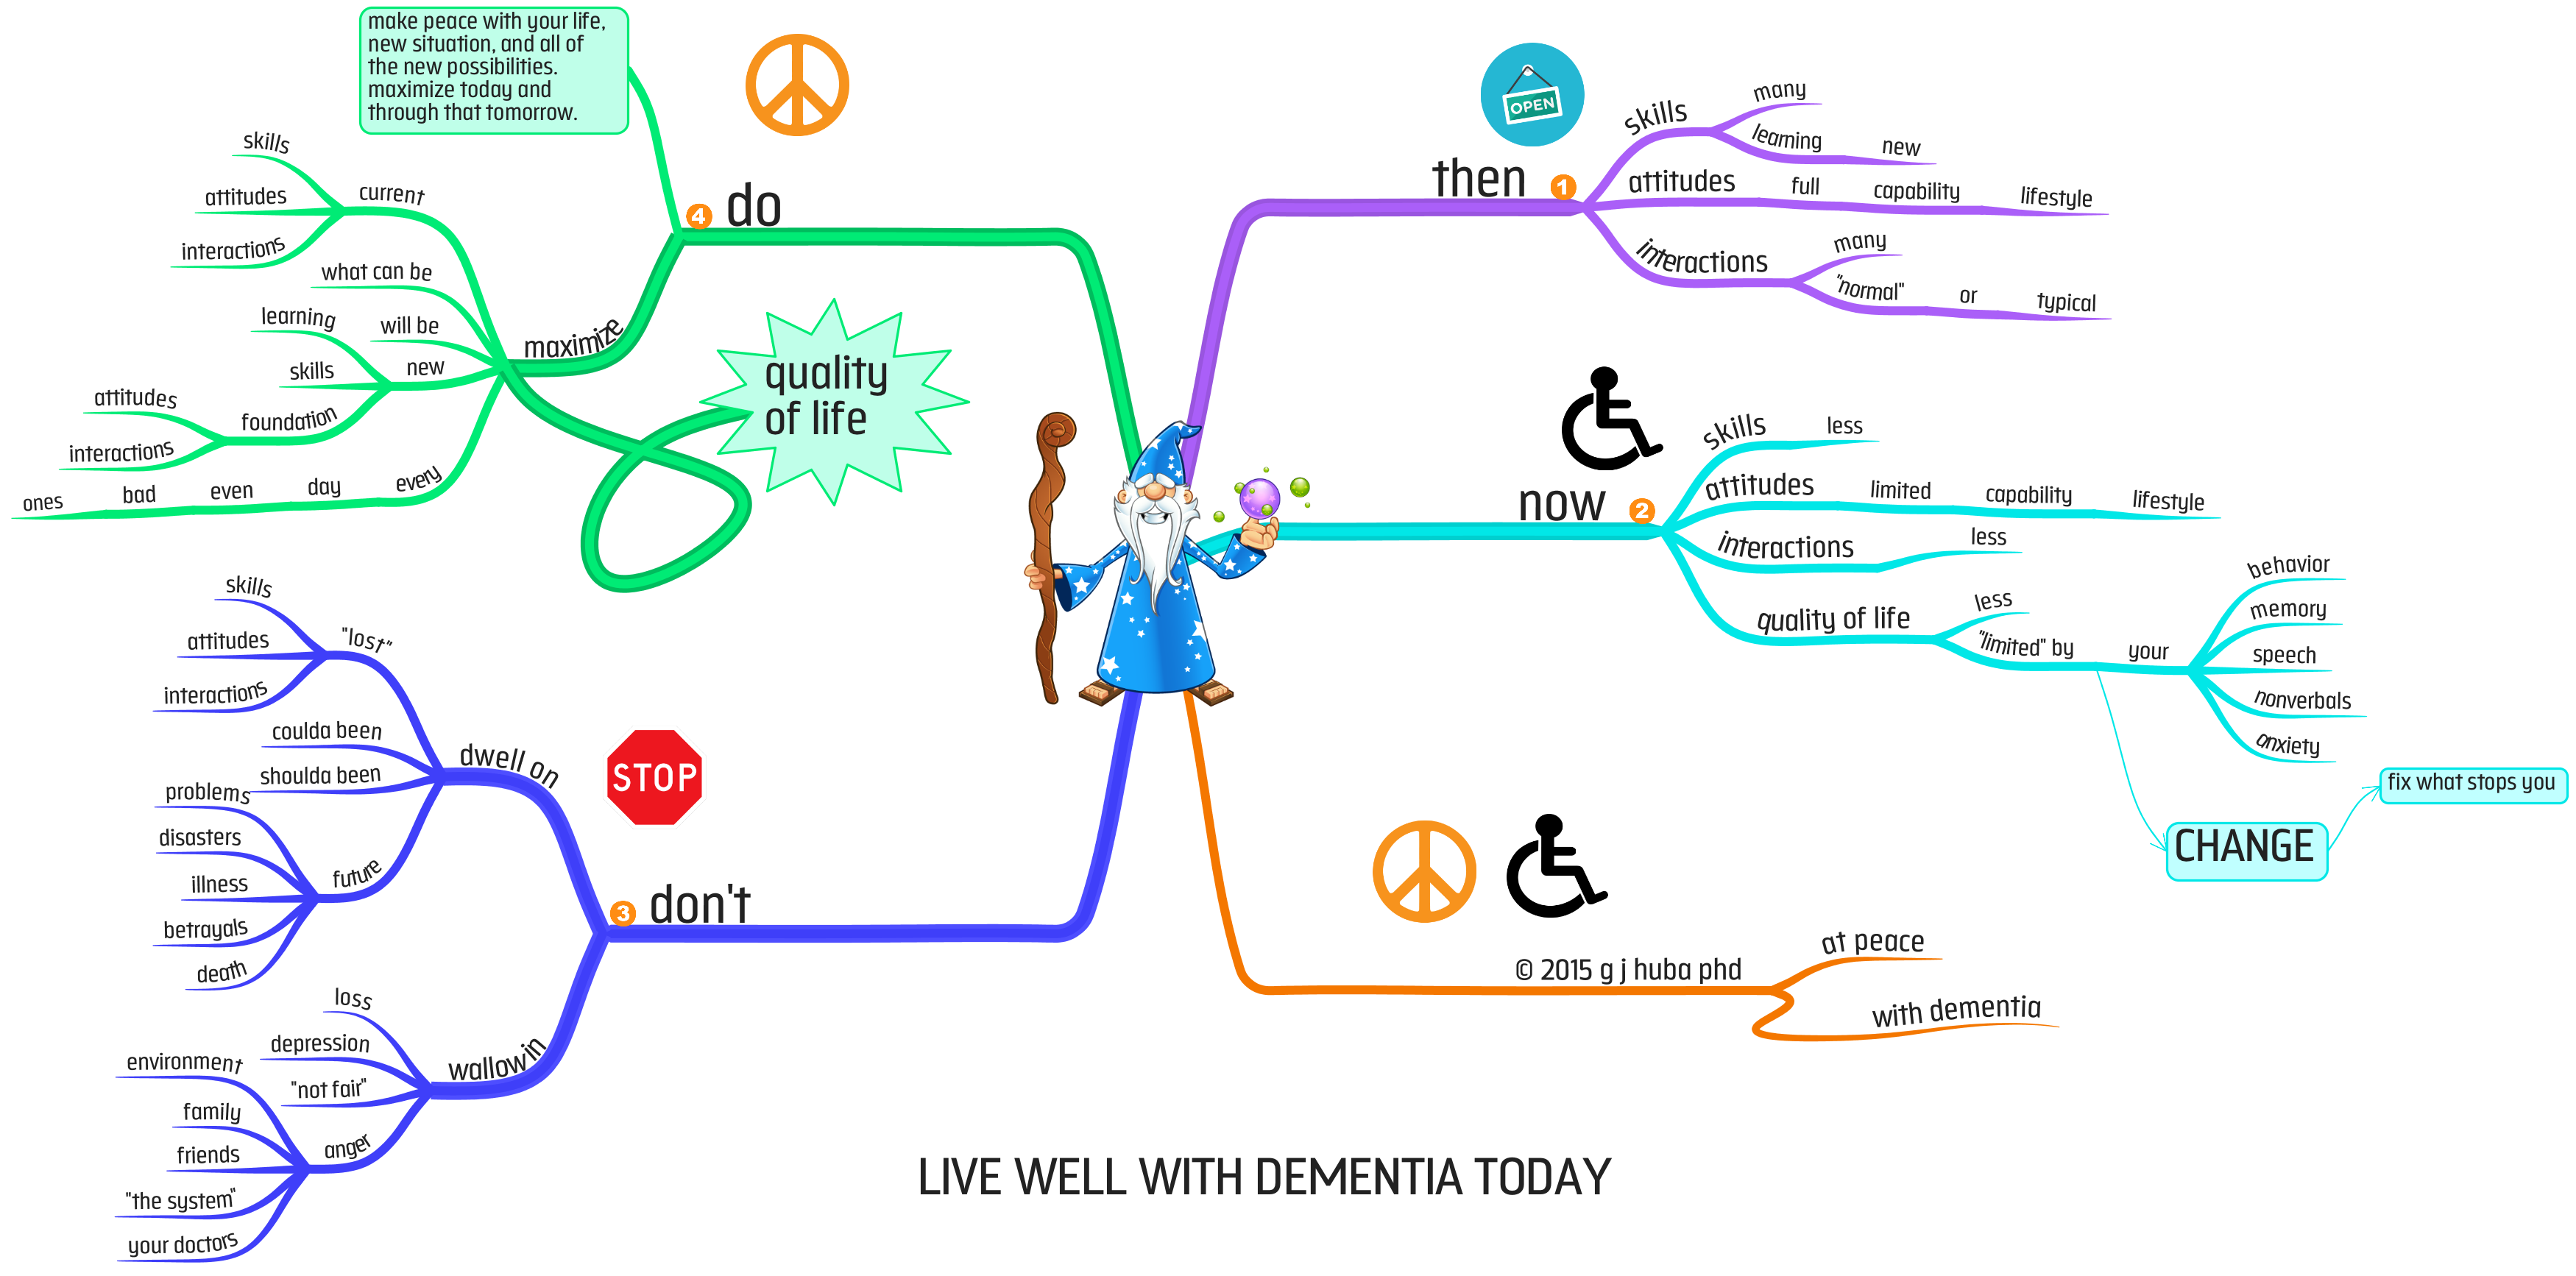 LIVE WELL WITH DEMENTIA TODAY